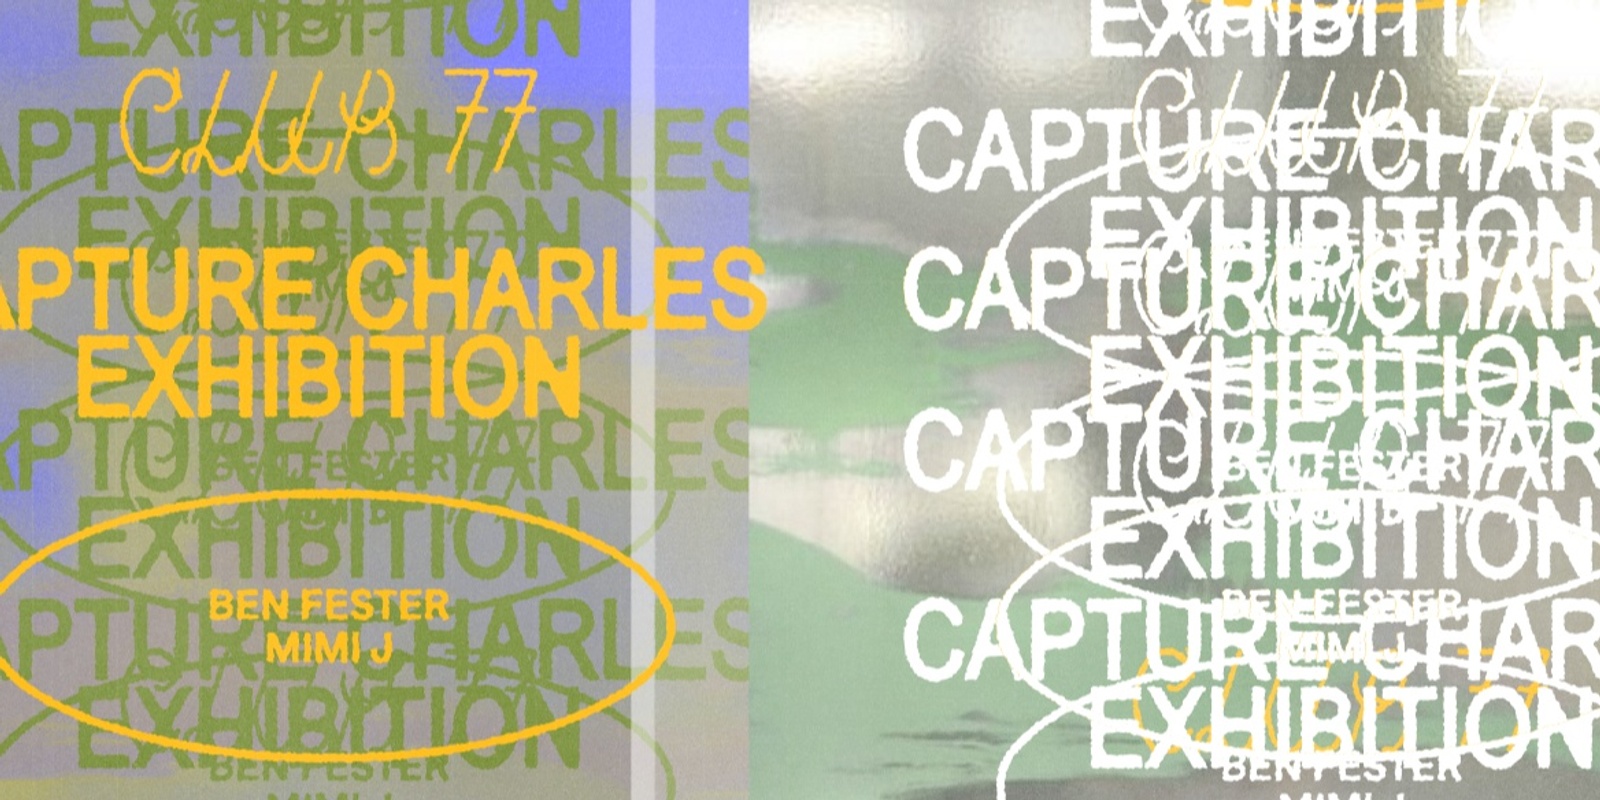 Banner image for Club 77 x Capture Charles Exhibition